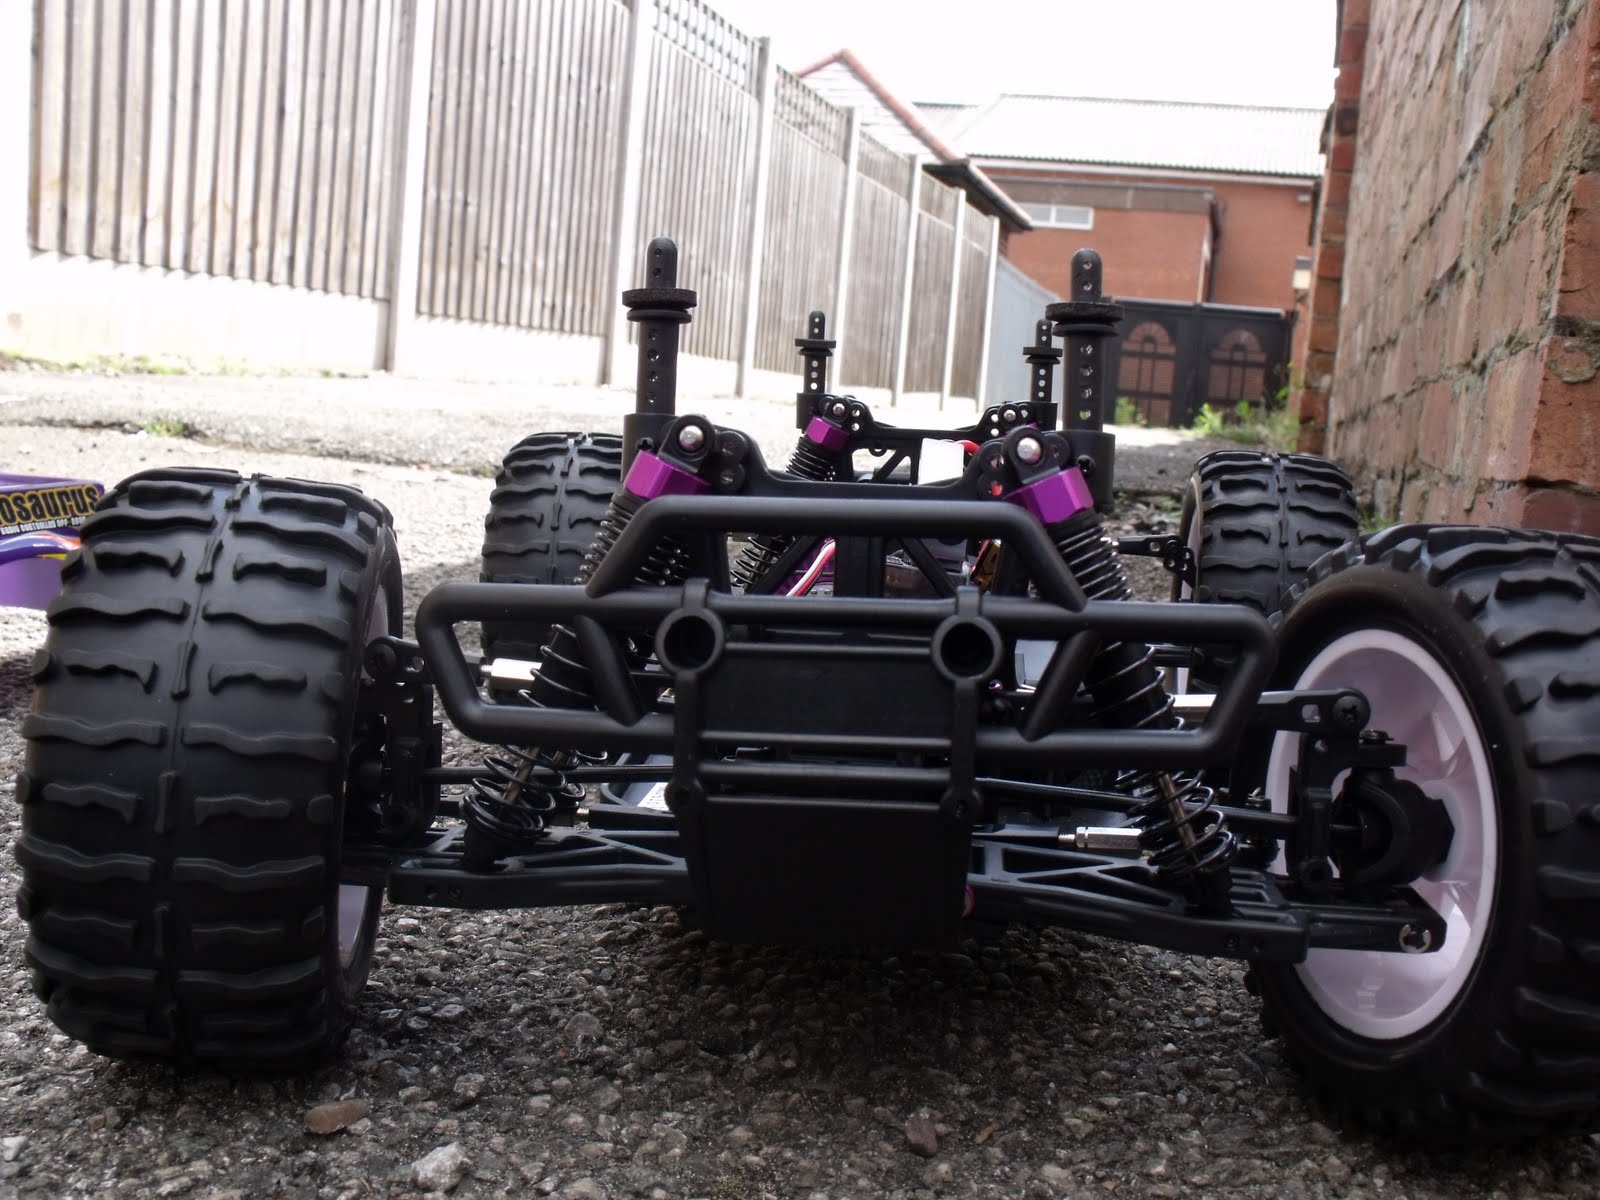 R.C Review: 1:10TH SCALE 4WD BATTERY POWERED OFF-ROAD R/C MONSTER TRUCK